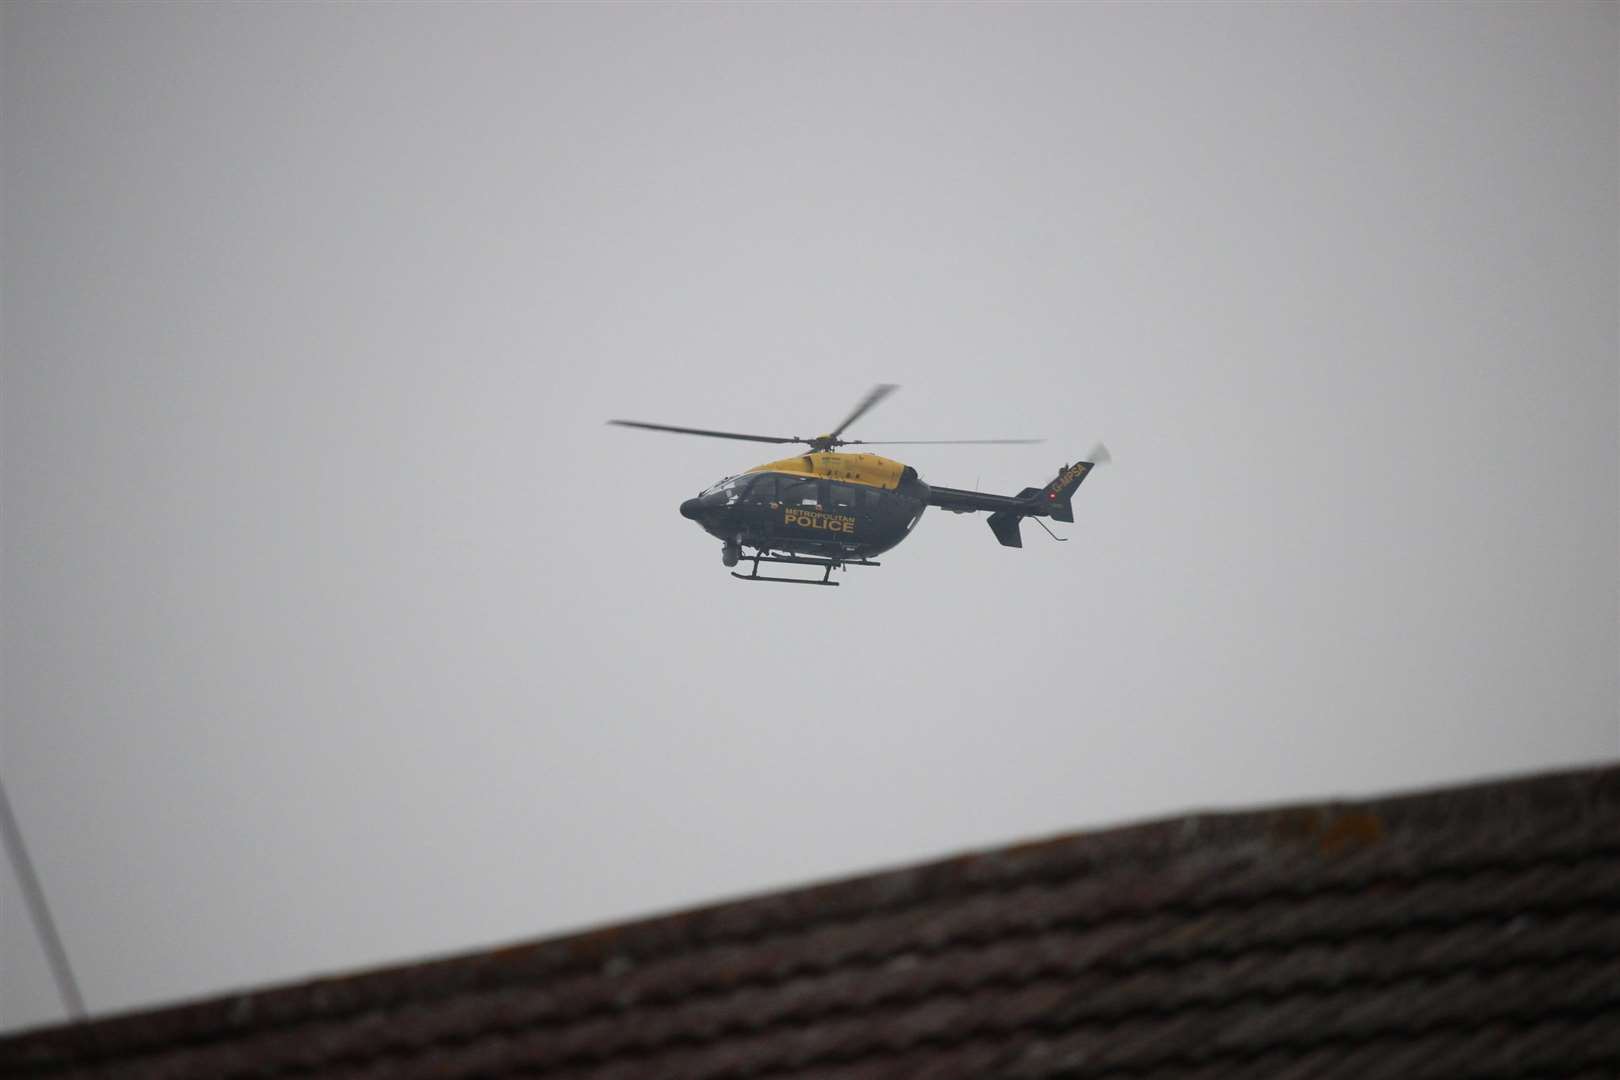 The police helicopter was up over Sheppey following the crash